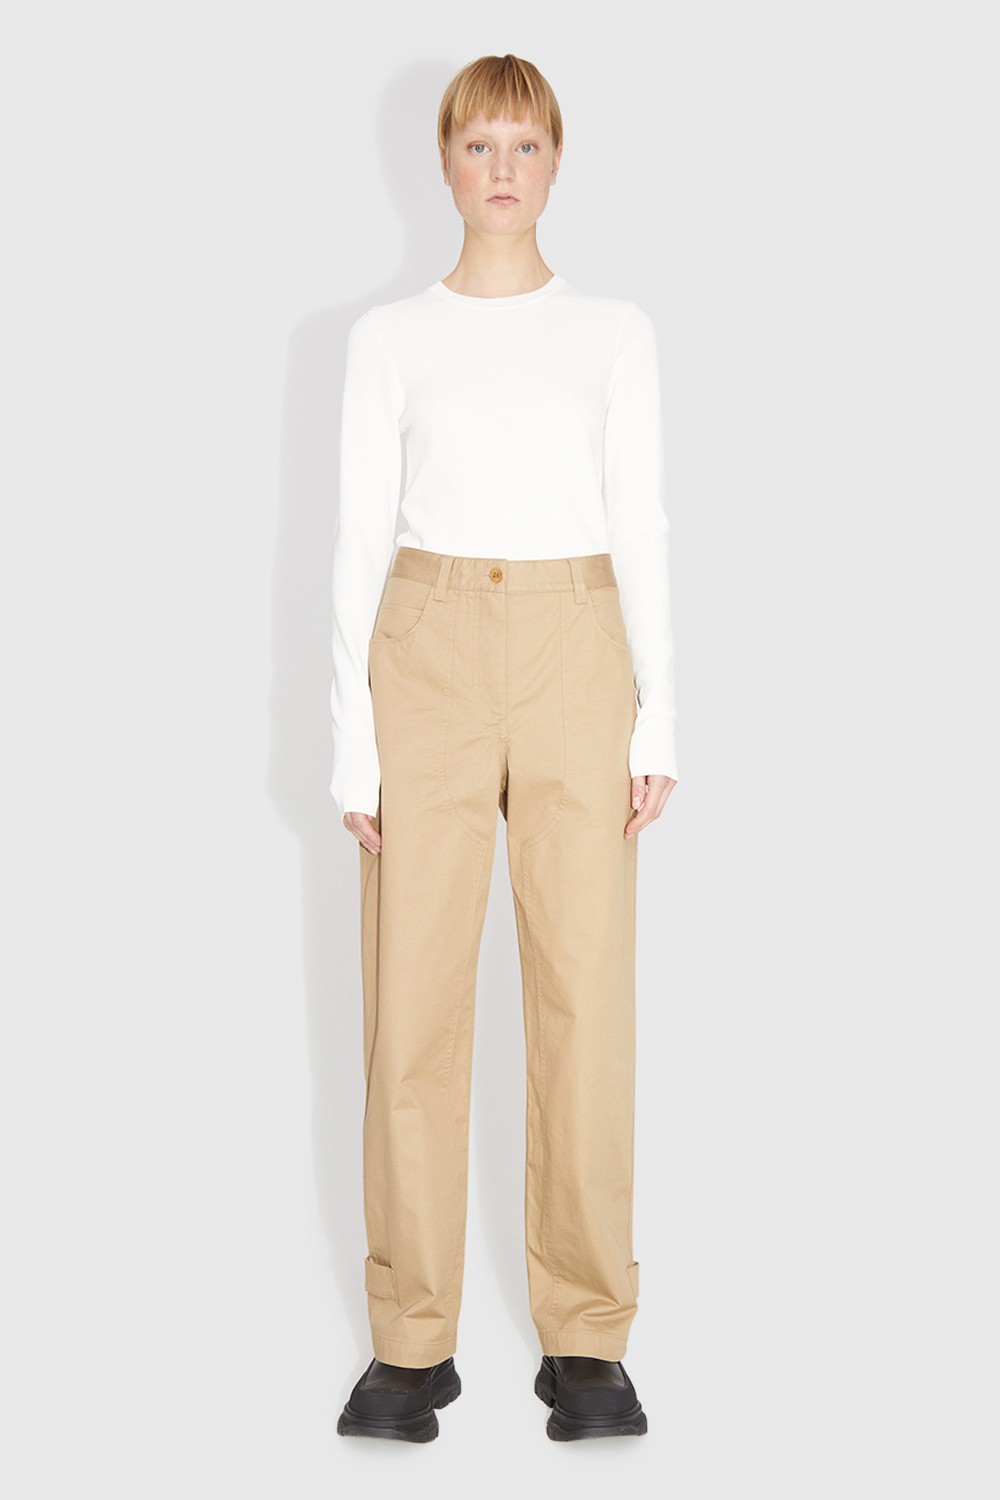 WOOD WOOD Buzz Trousers